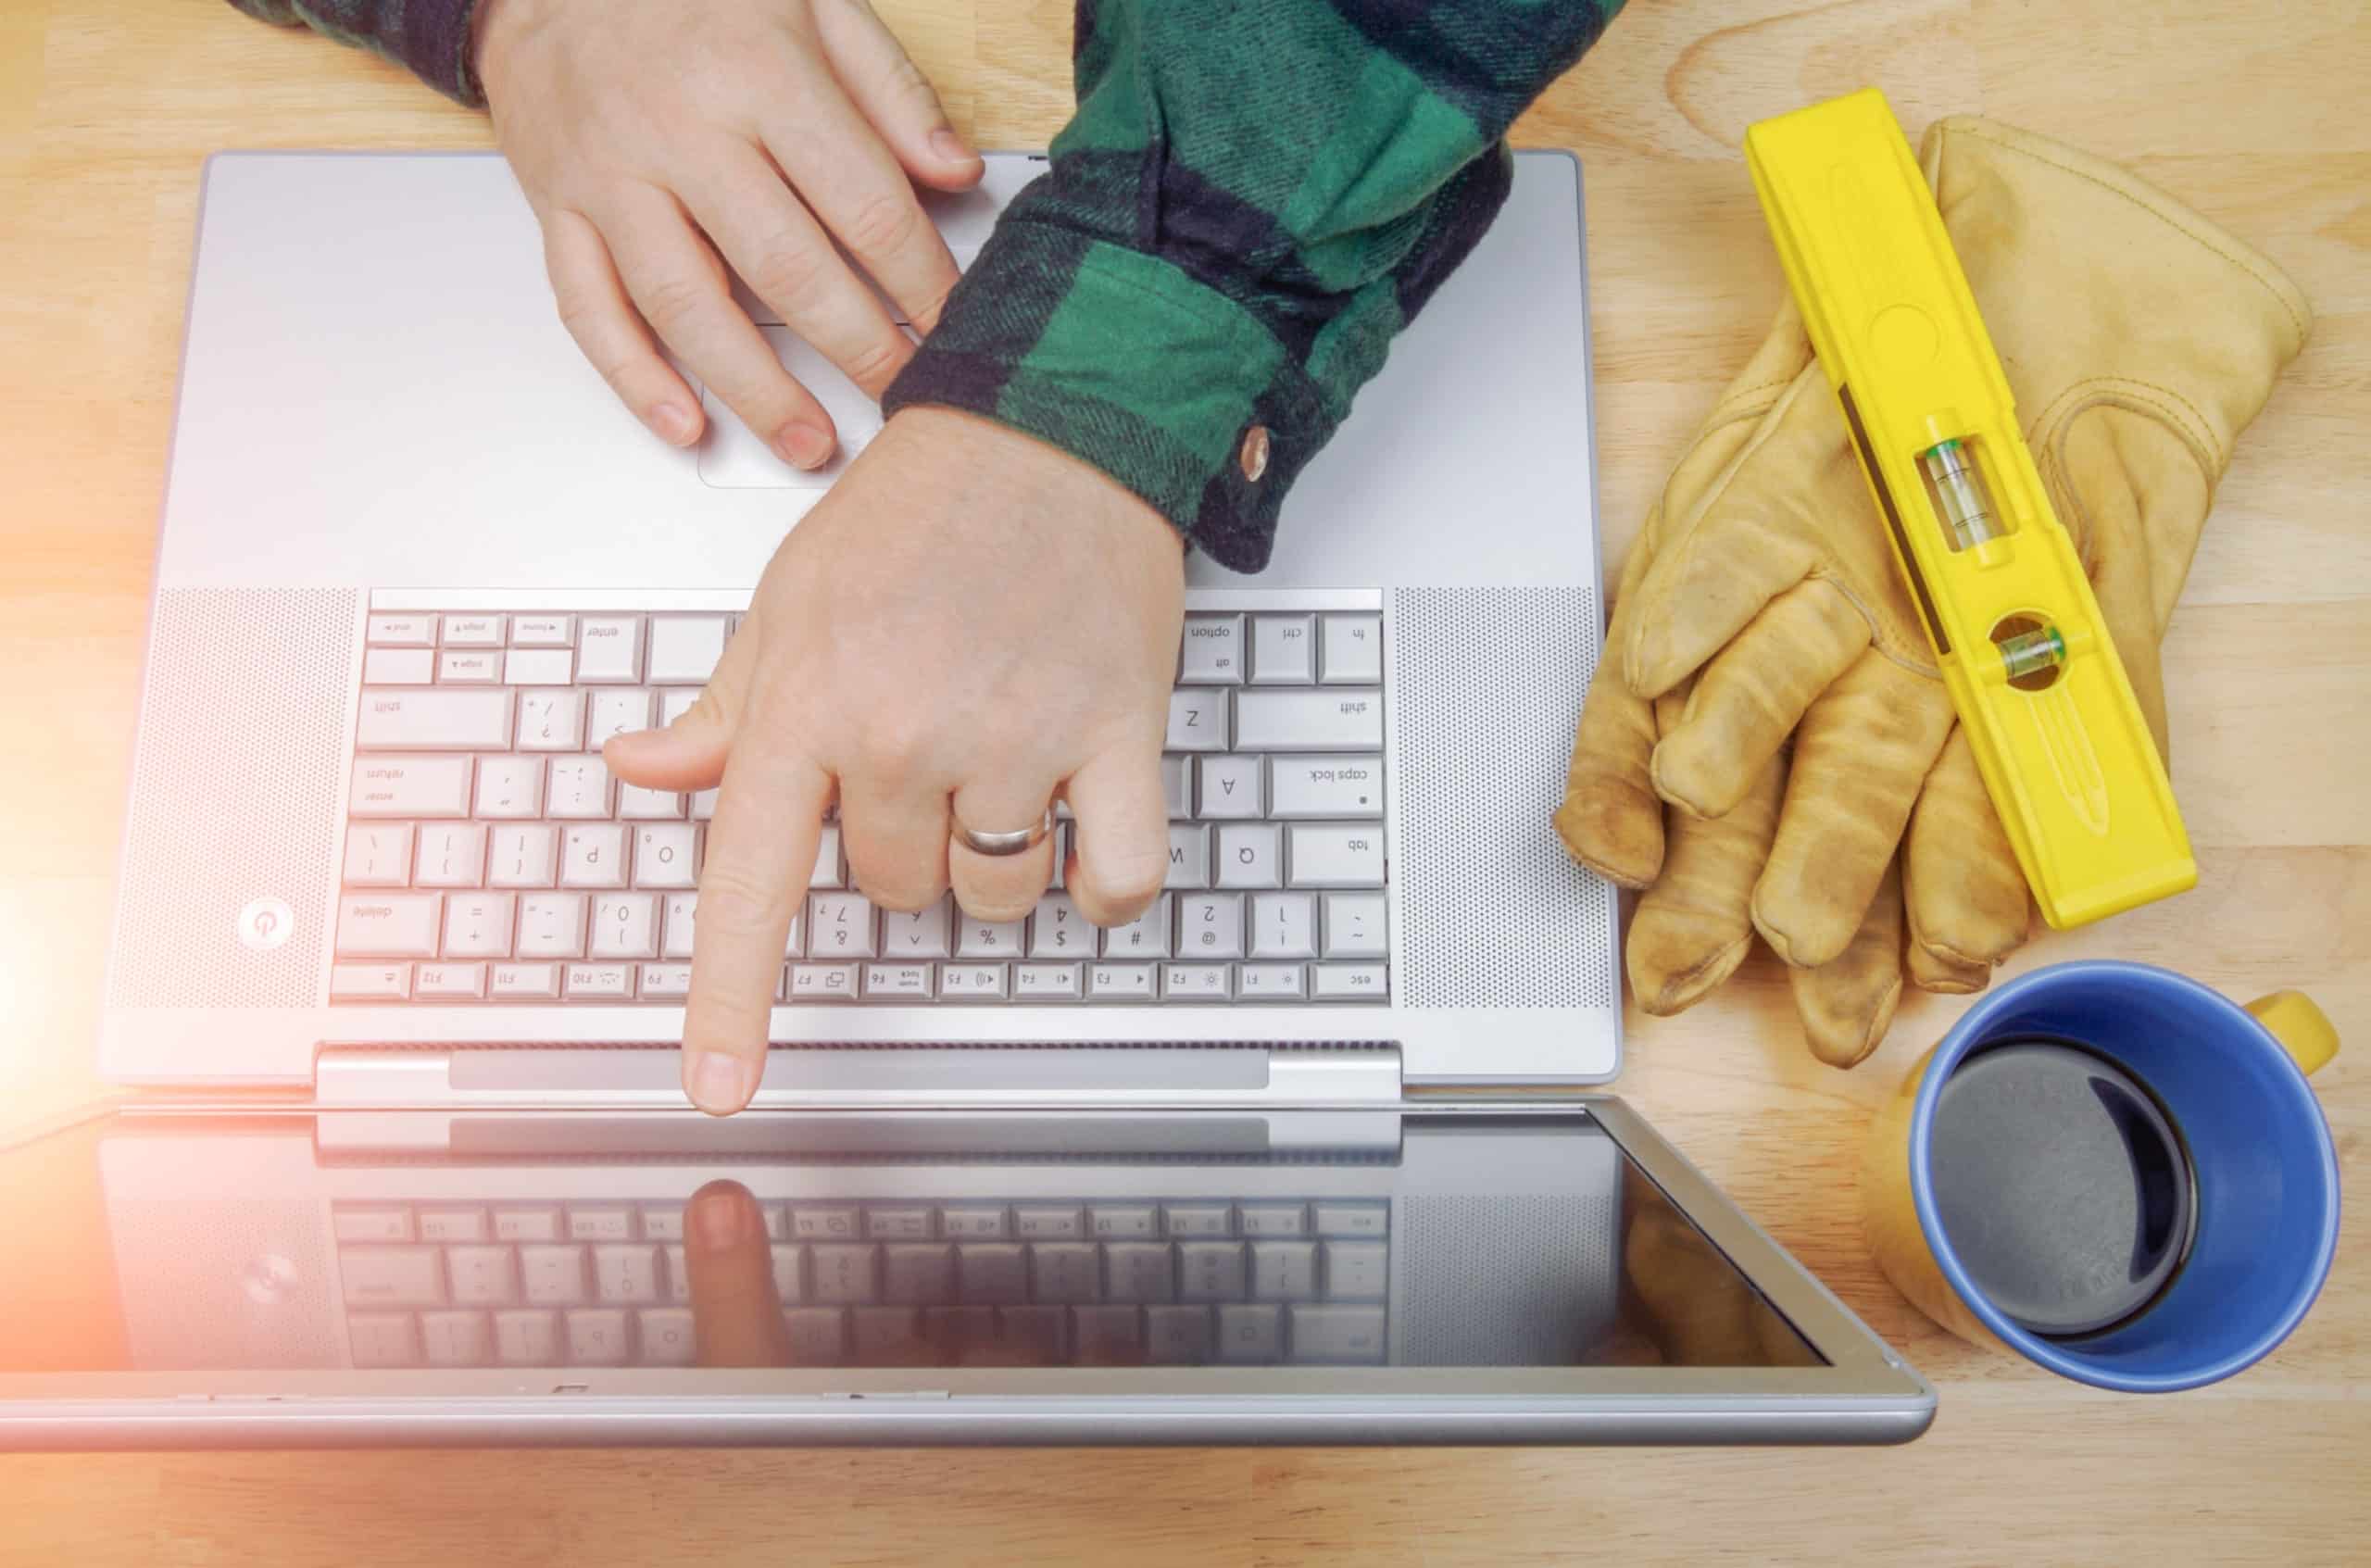 Blogs Every Contractor Should Know